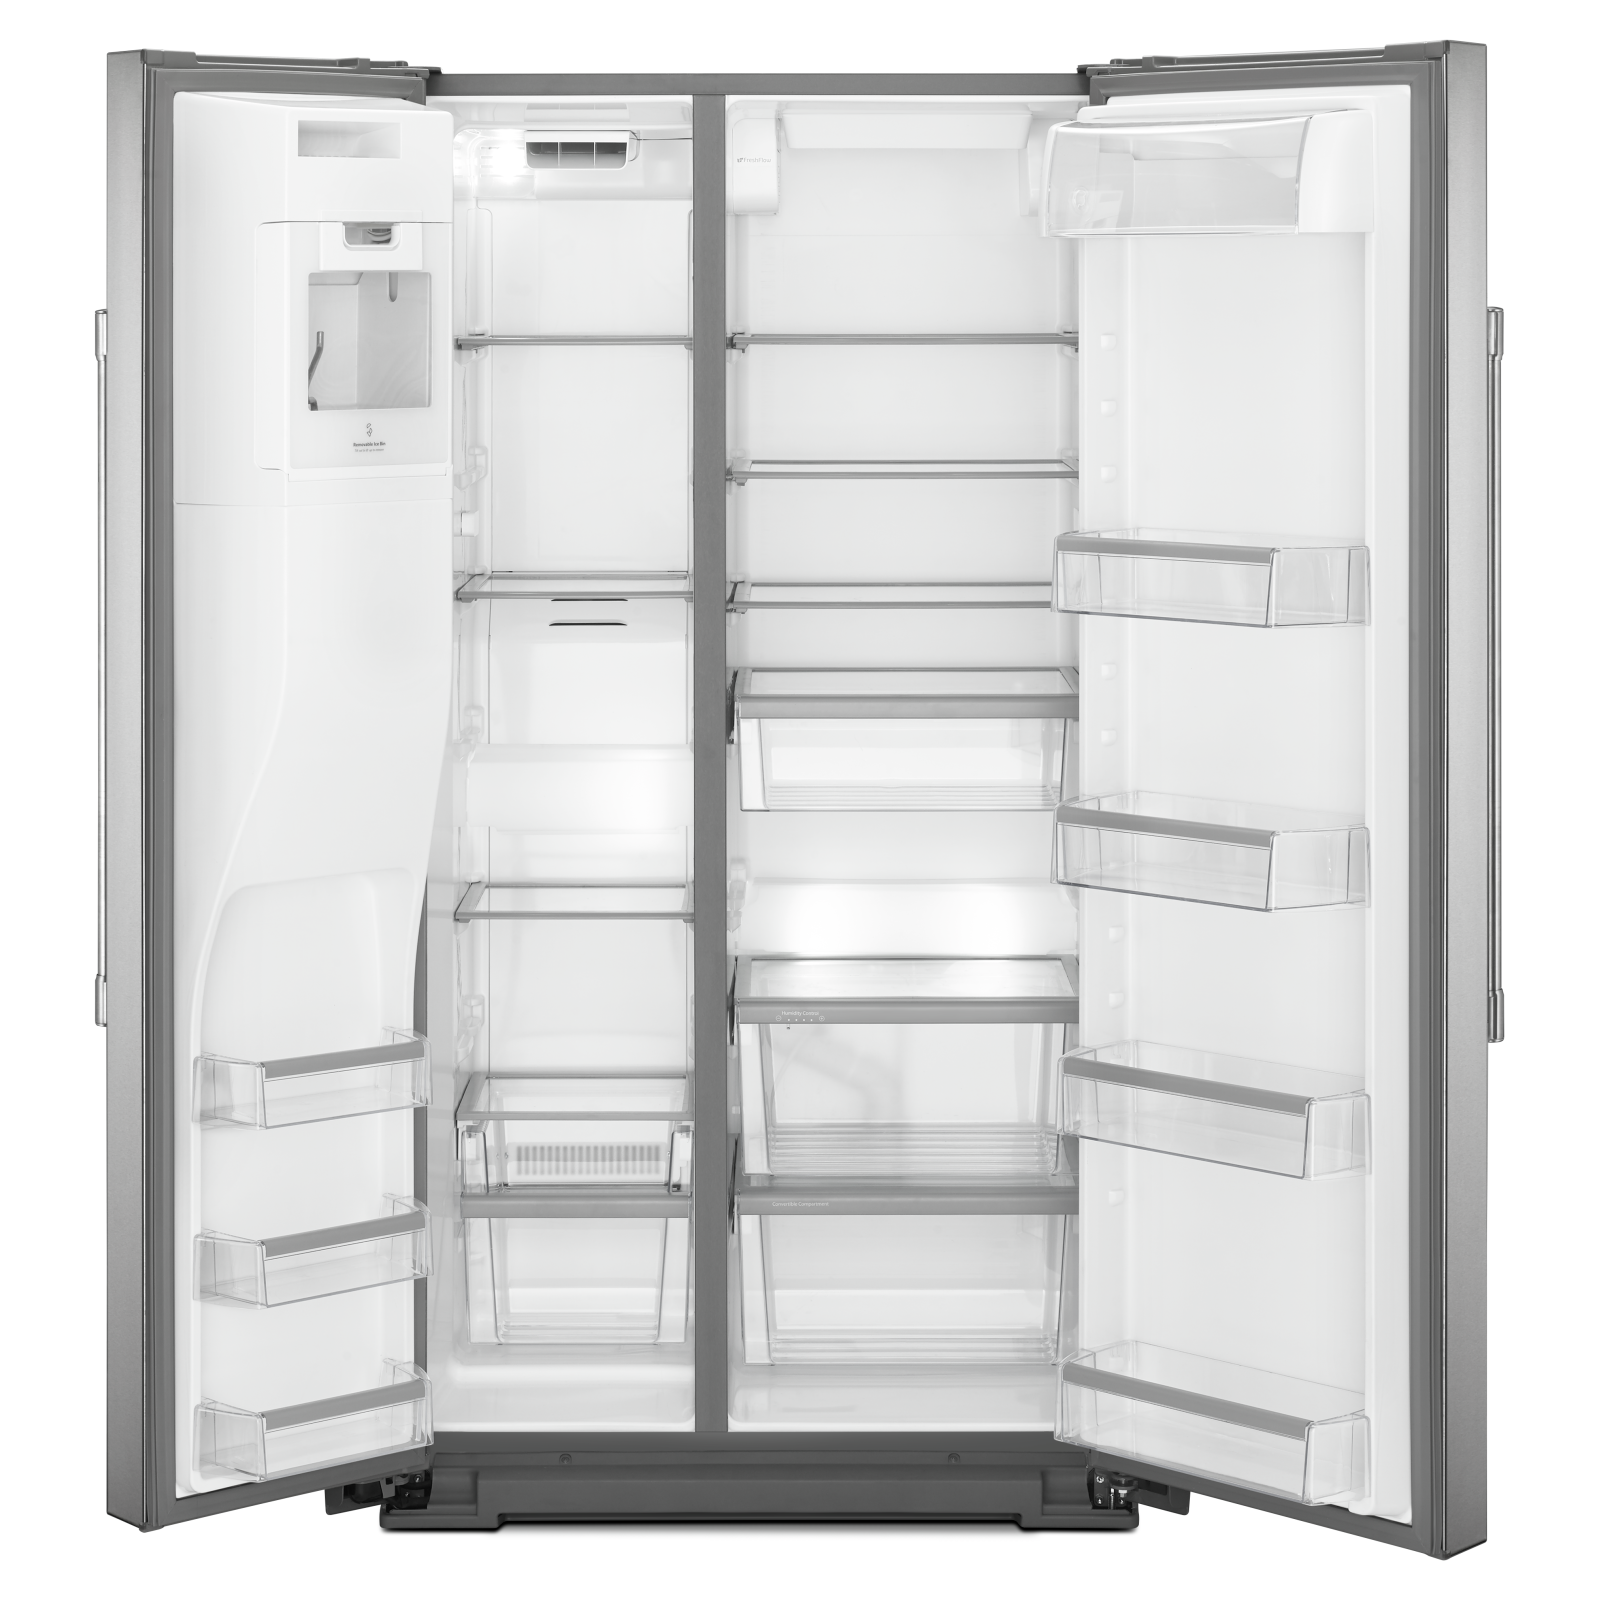 Maytag - 36 Inch 20.6 cu. ft Side by Side Refrigerator in Stainless - MSC21C6MFZ